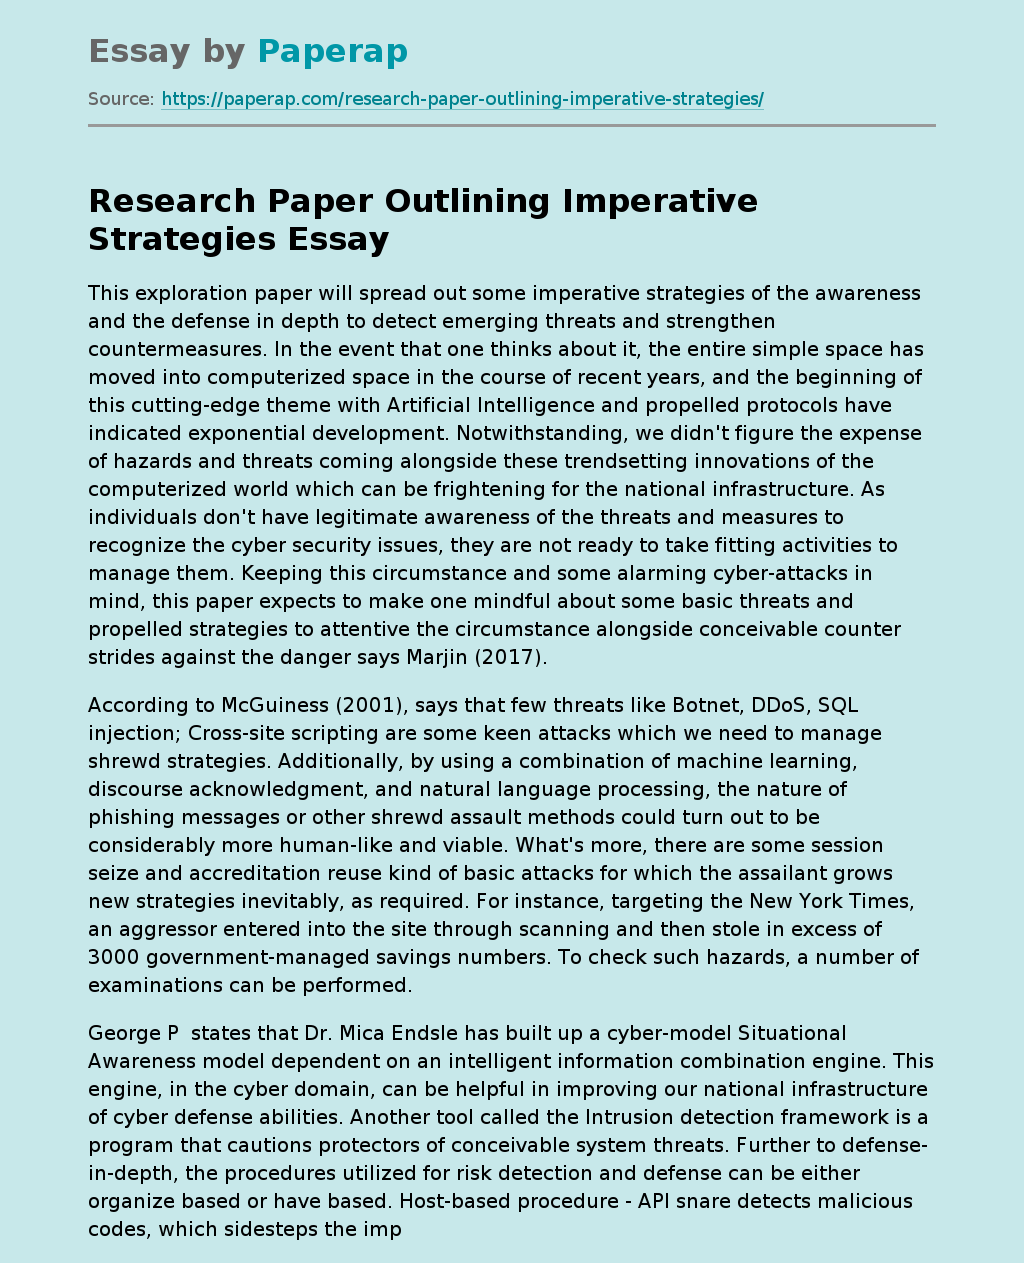 Research Paper Outlining Imperative Strategies